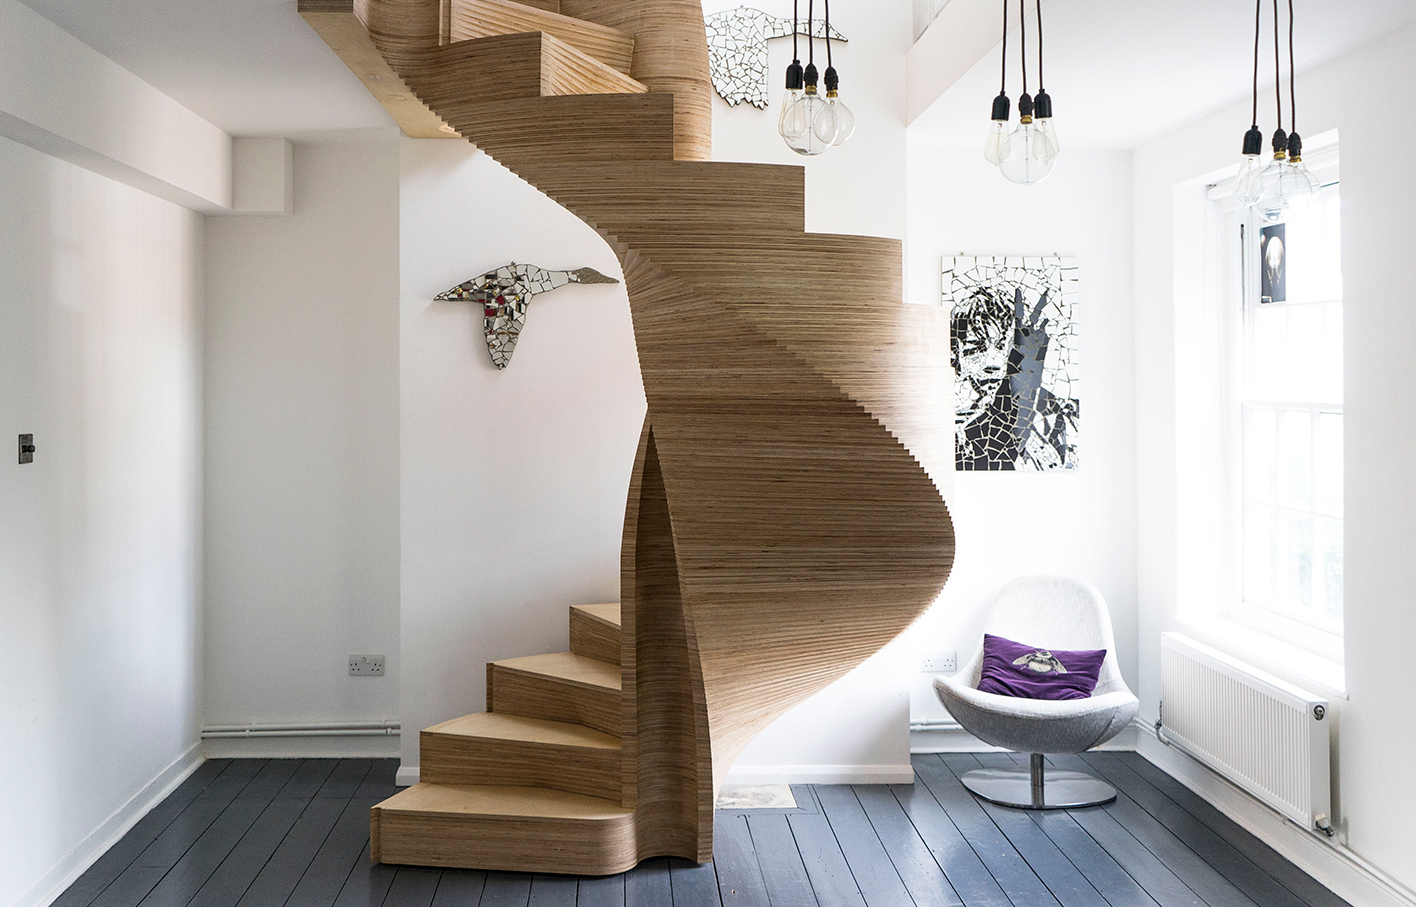 Aldworth James & Bond | Plywood Staircase | CNC routed plywood spiral staircase by AJ&B Works